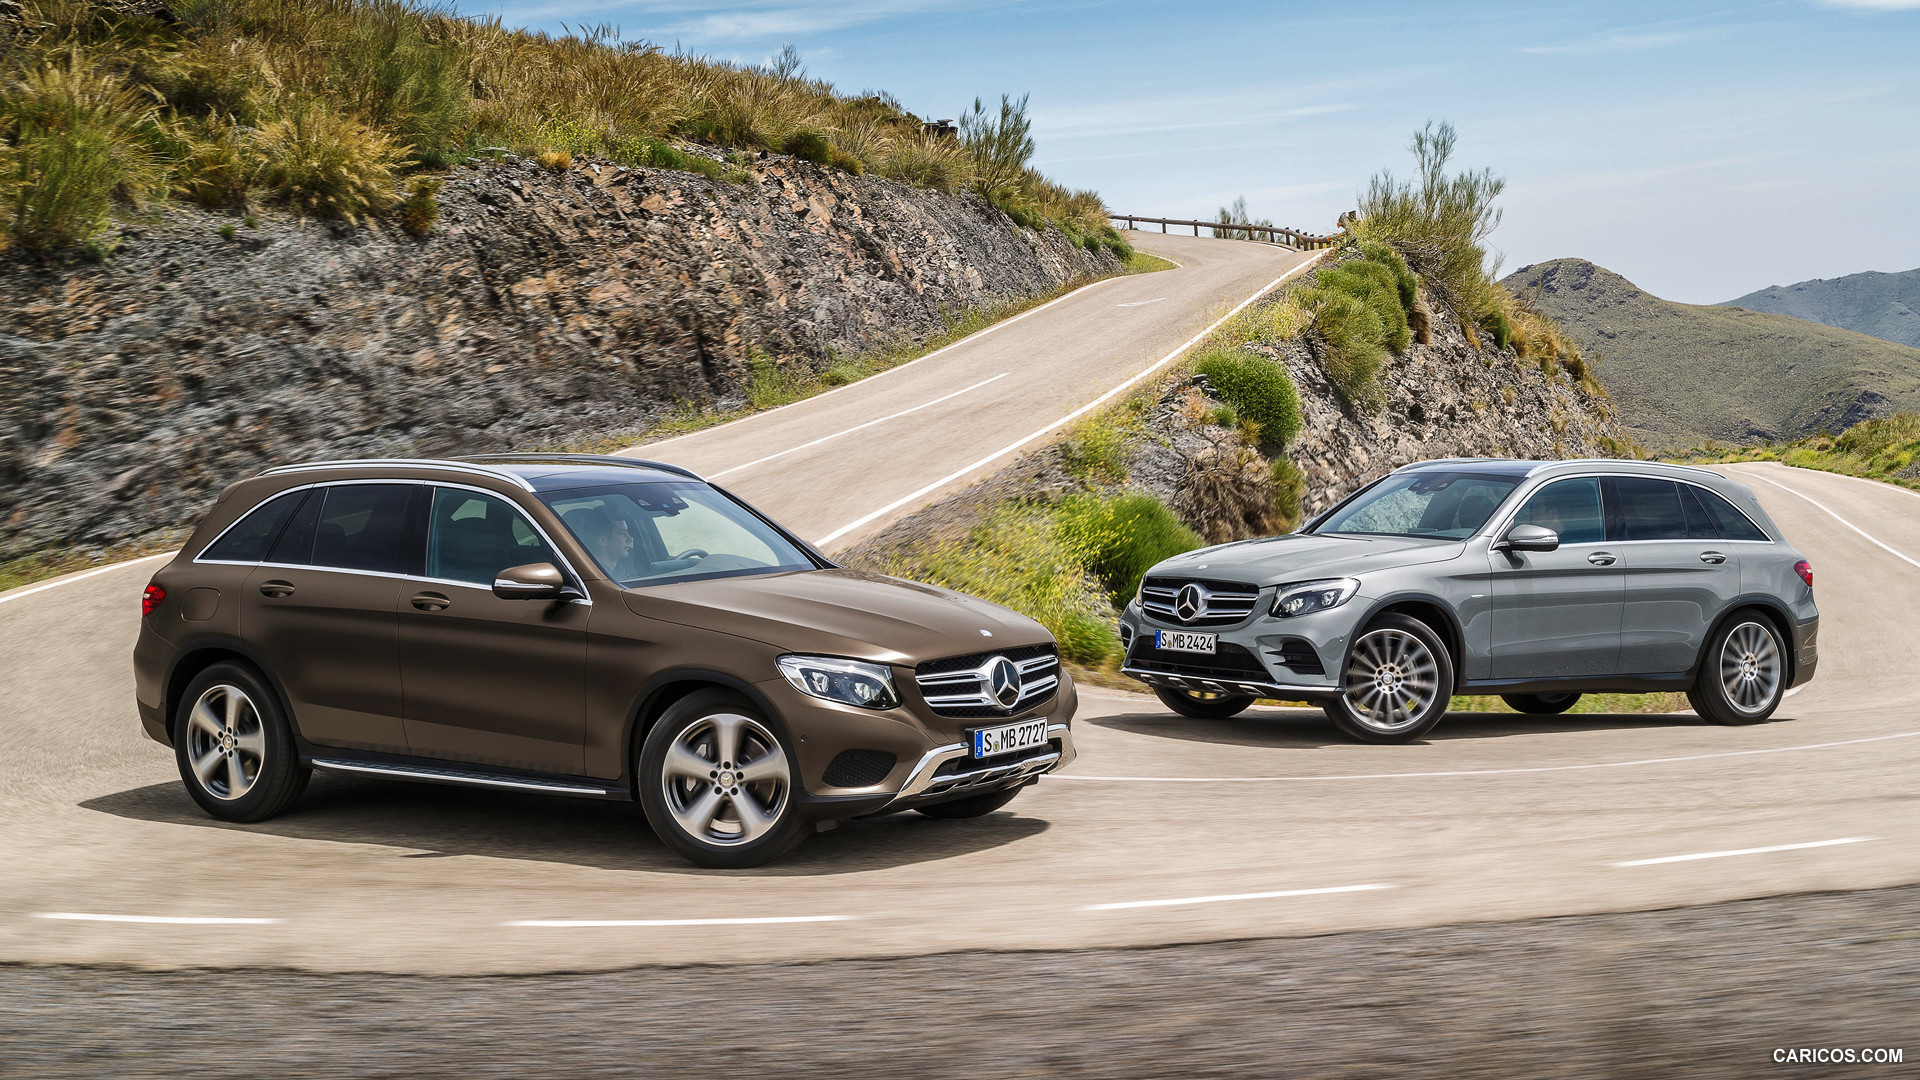 2016 Mercedes-Benz GLC-Class GLC 250d 4MATIC (Citrine Brown Magno, Offroad Line) - Side, #12 of 254